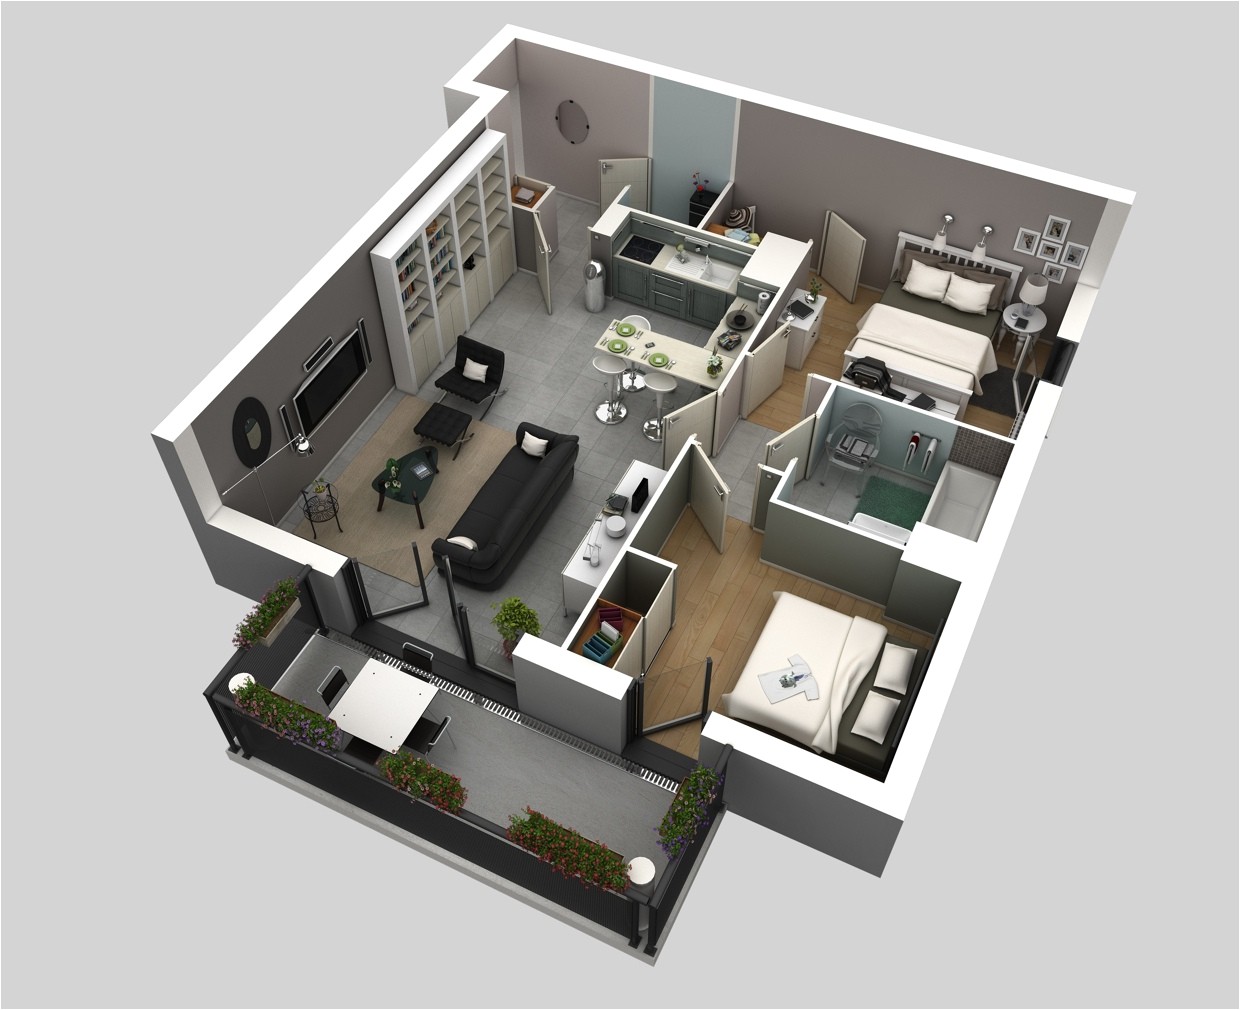 2 Bedroom Floor Plans Home 50 3d Floor Plans Lay Out Designs for 2 Bedroom House or